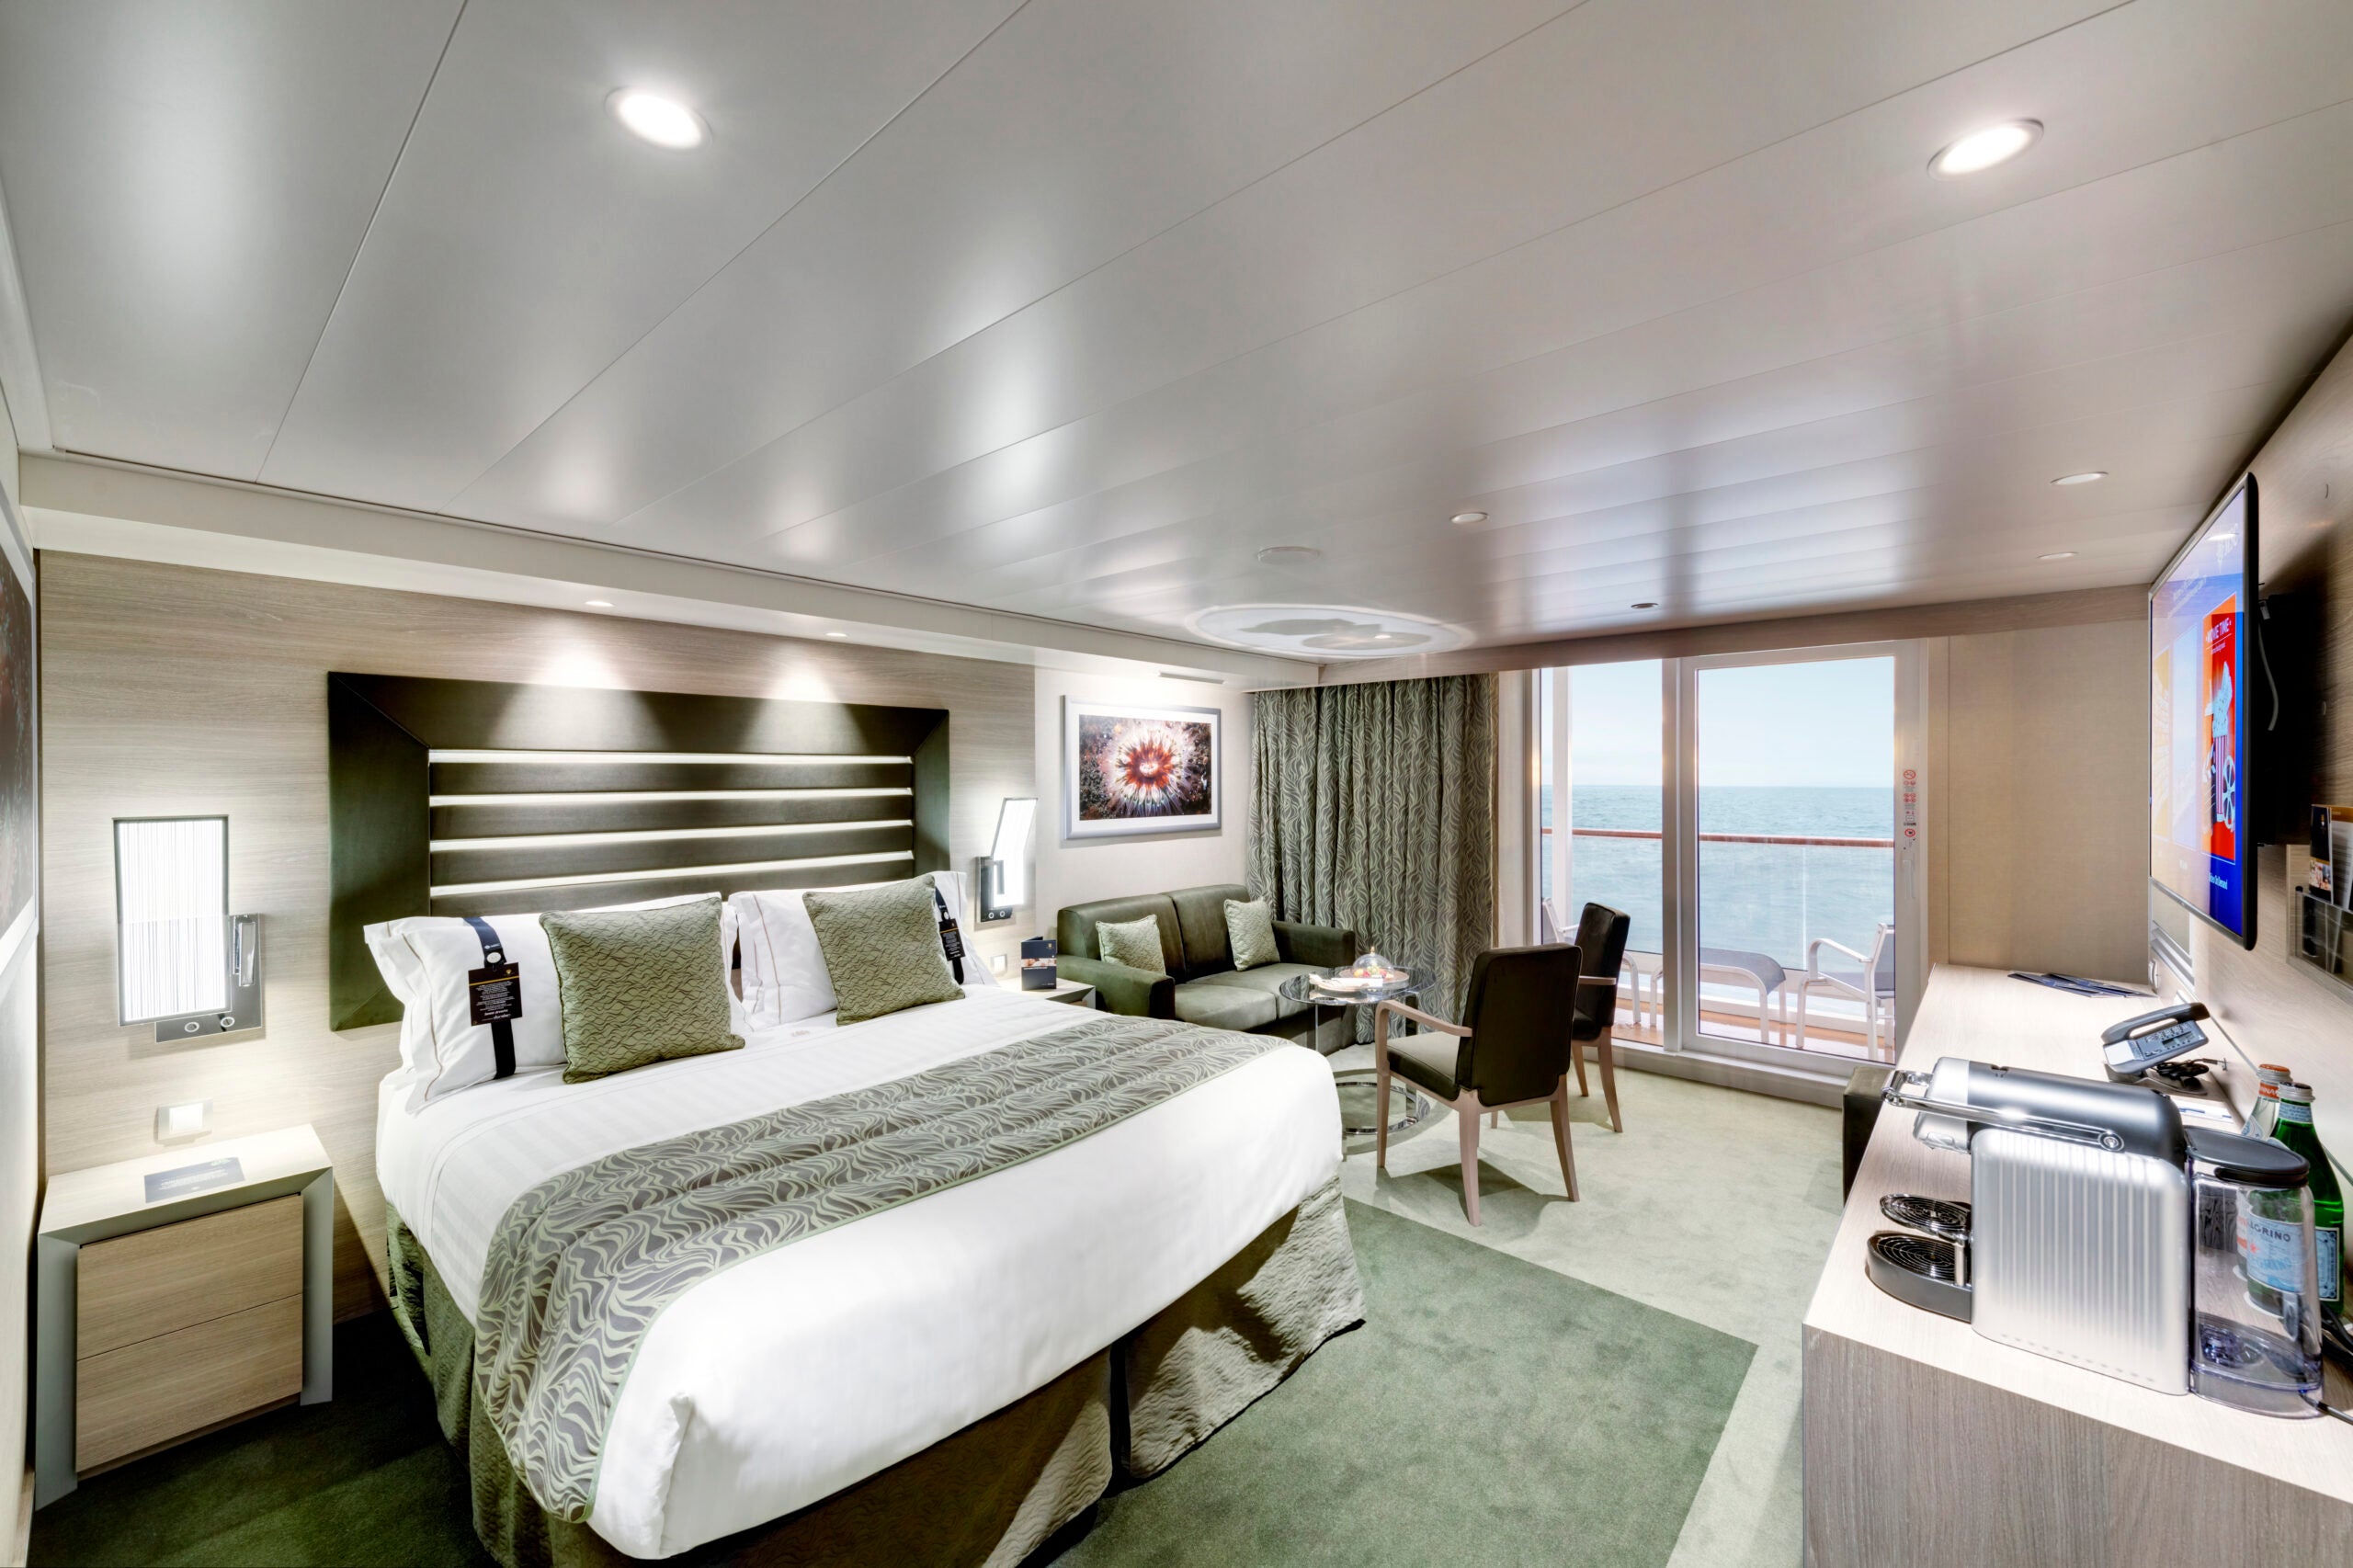 msc cruise package levels